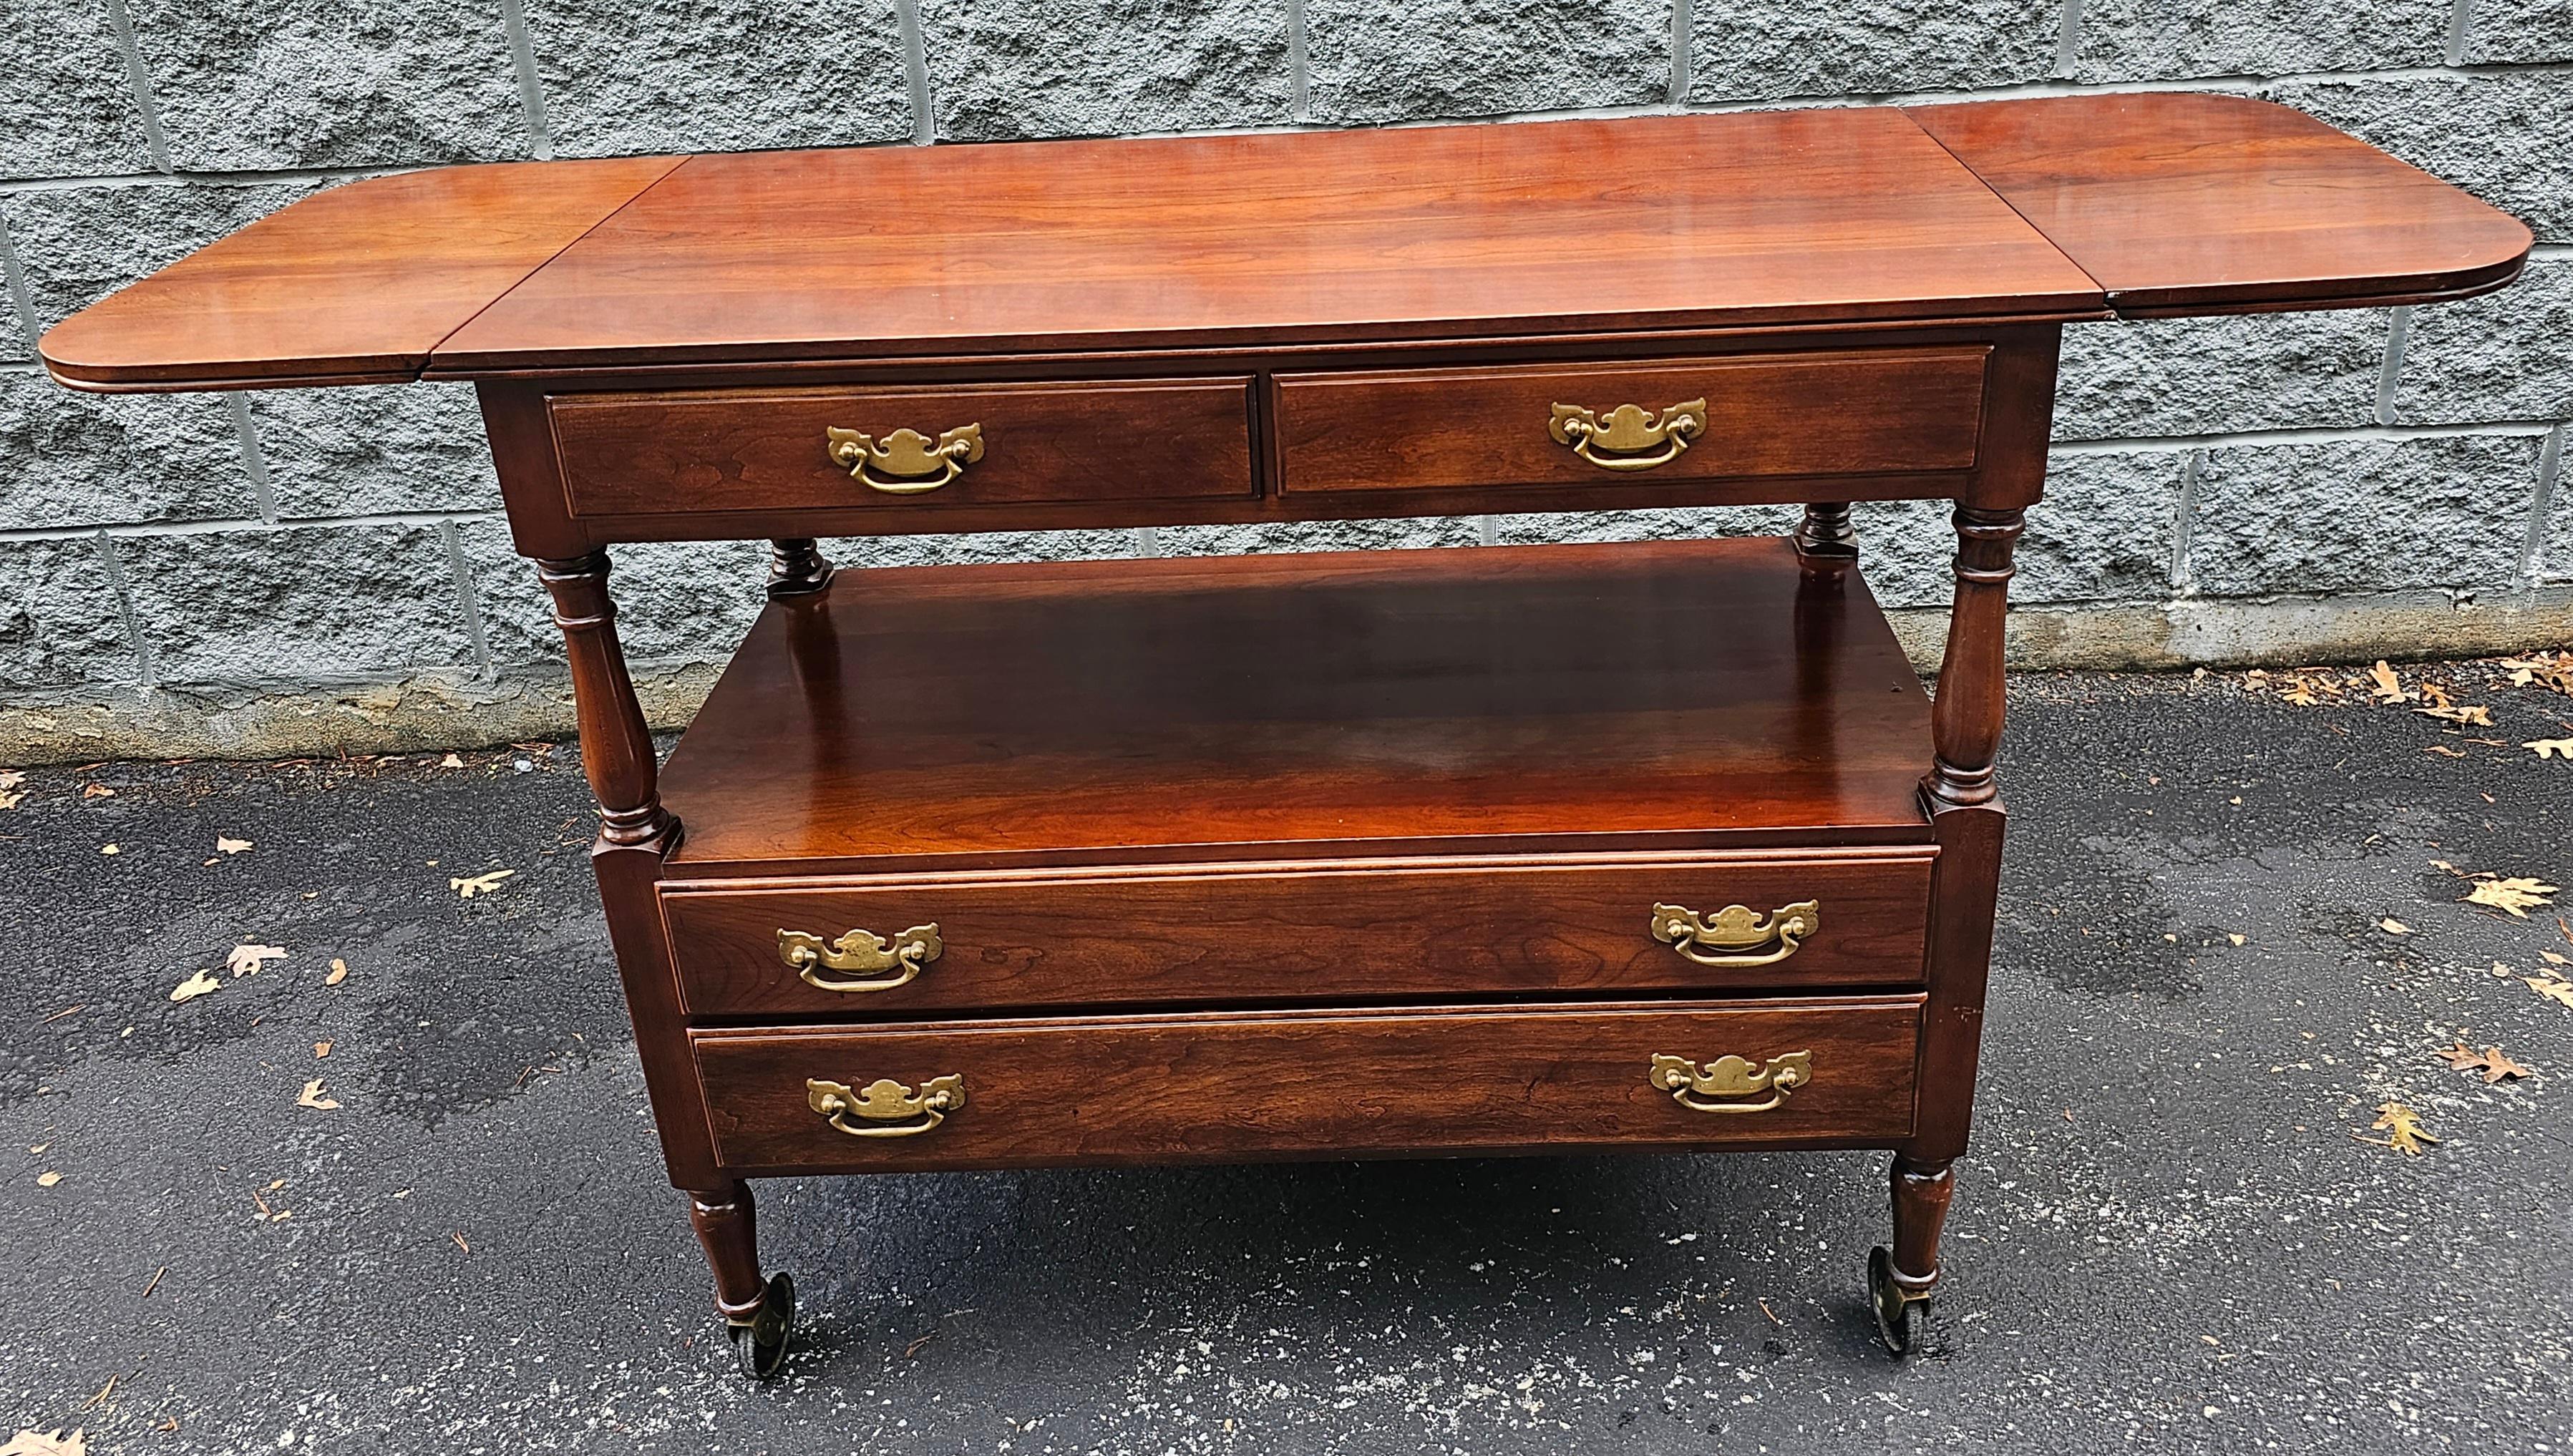 Mid Century Statton Trutype Furniture Two tier Cherry Four-Drawer Rolling Drop-Leaf Dry Bar and Buffet Server with 4 large drawers for ample storage. Measures 37.